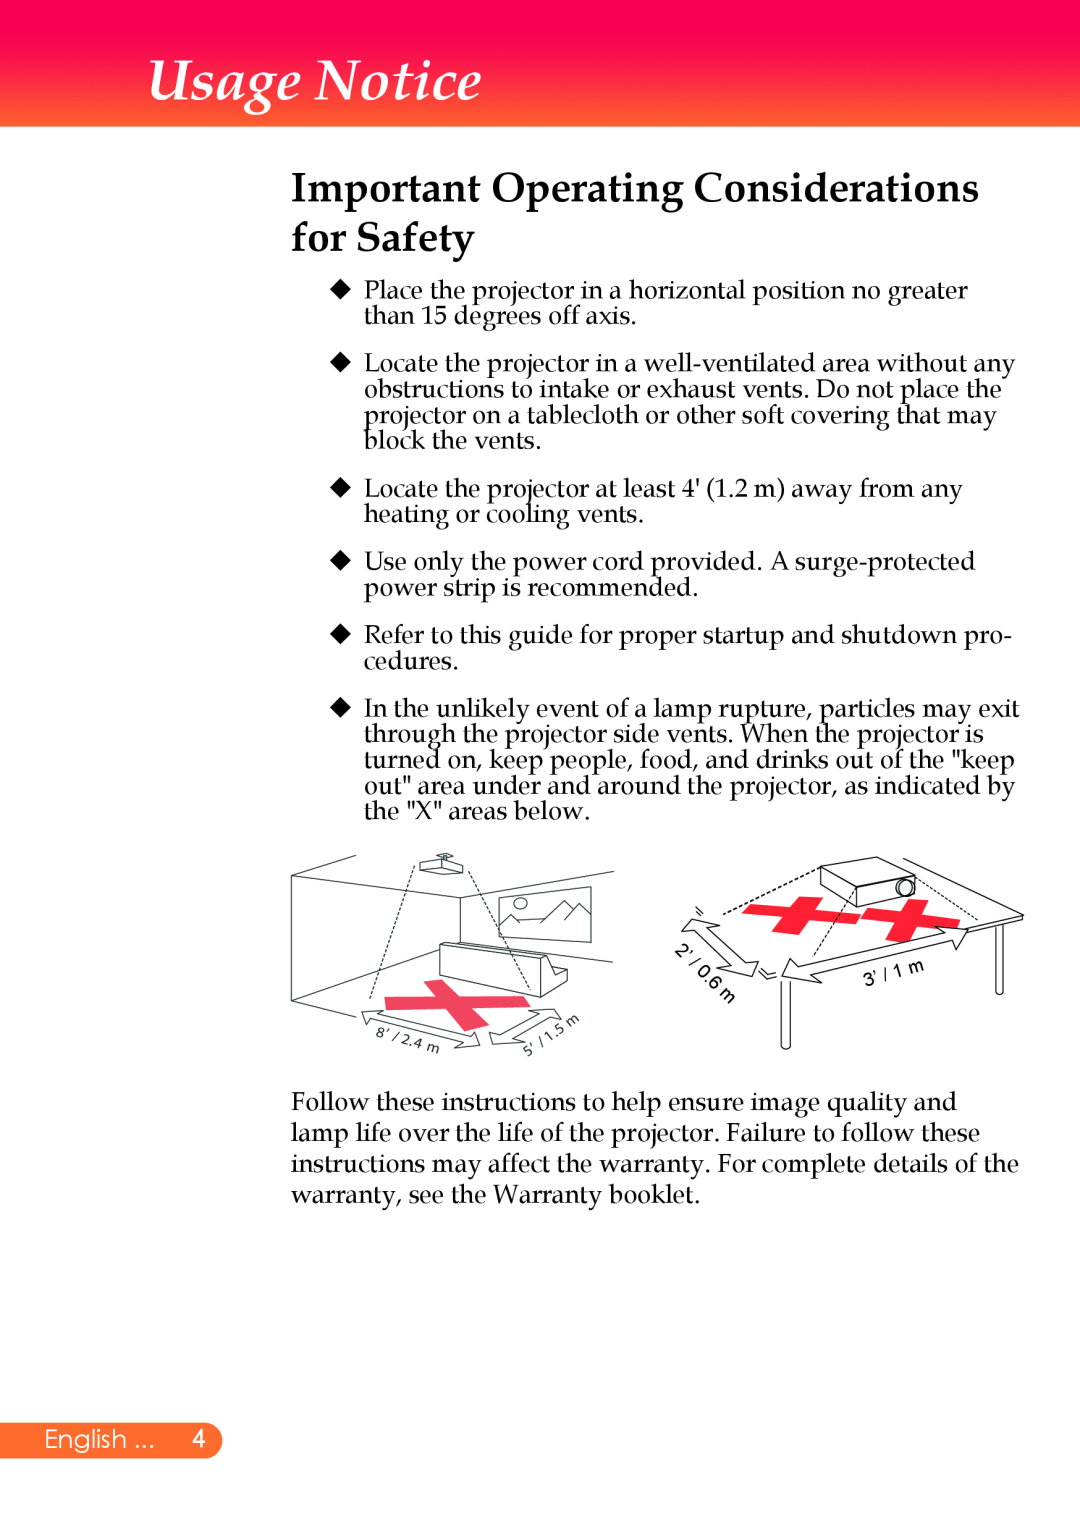 InFocus X9 manual Important Operating Considerations for Safety, English ... , Usage Notice, 2 ’ / 0 . 6 m 